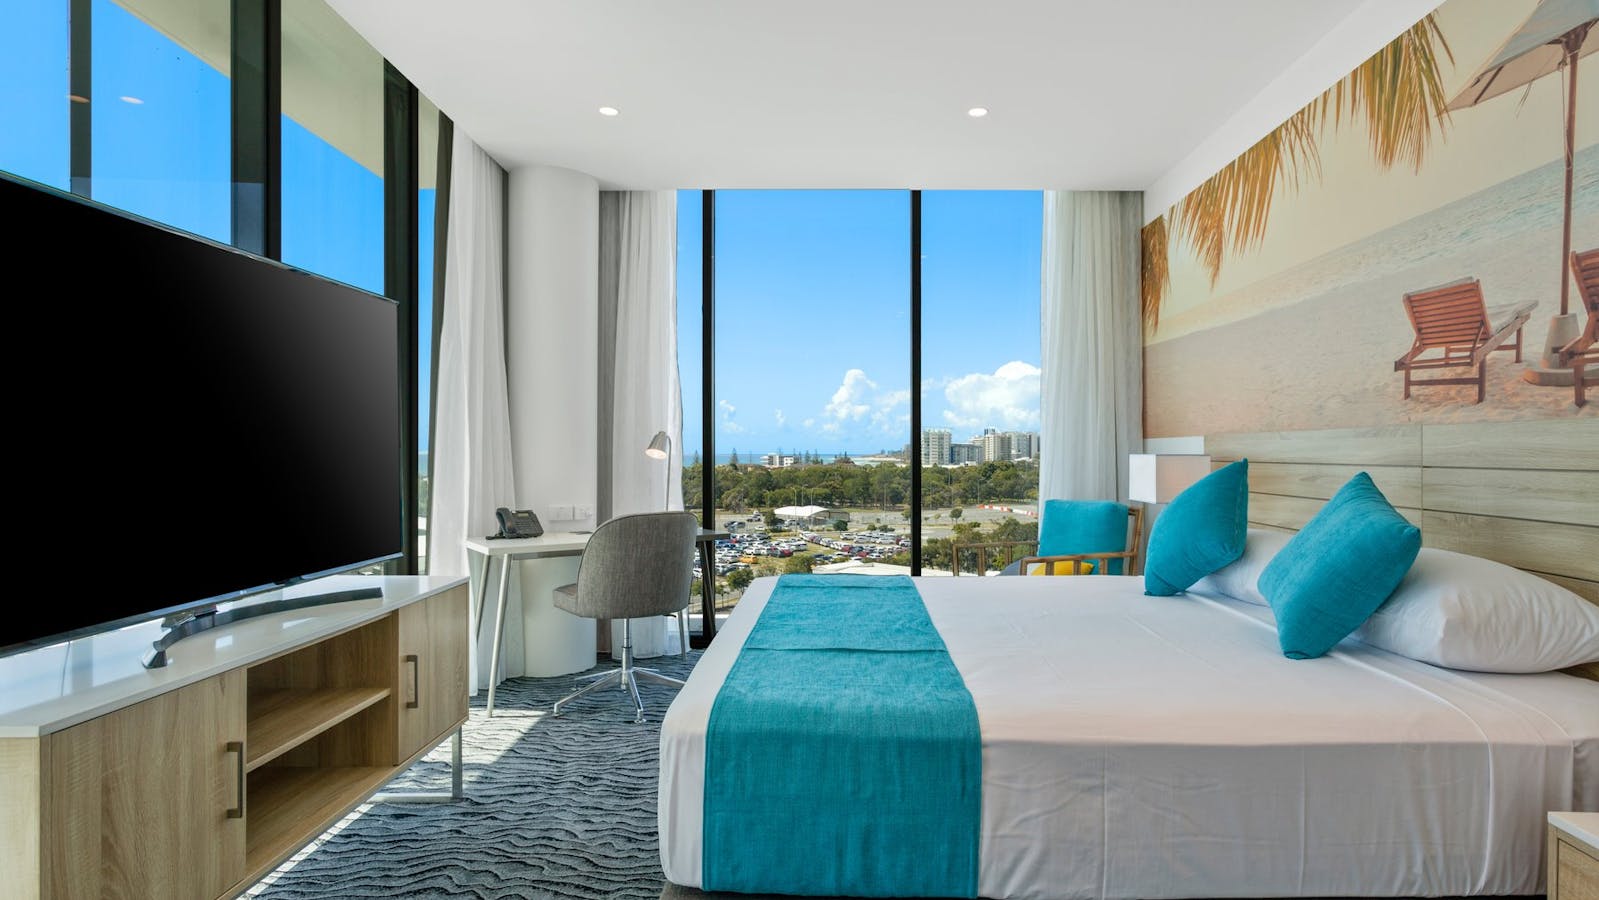 Coastal Executive Rooms provide wrap around views with floor to ceiling windows